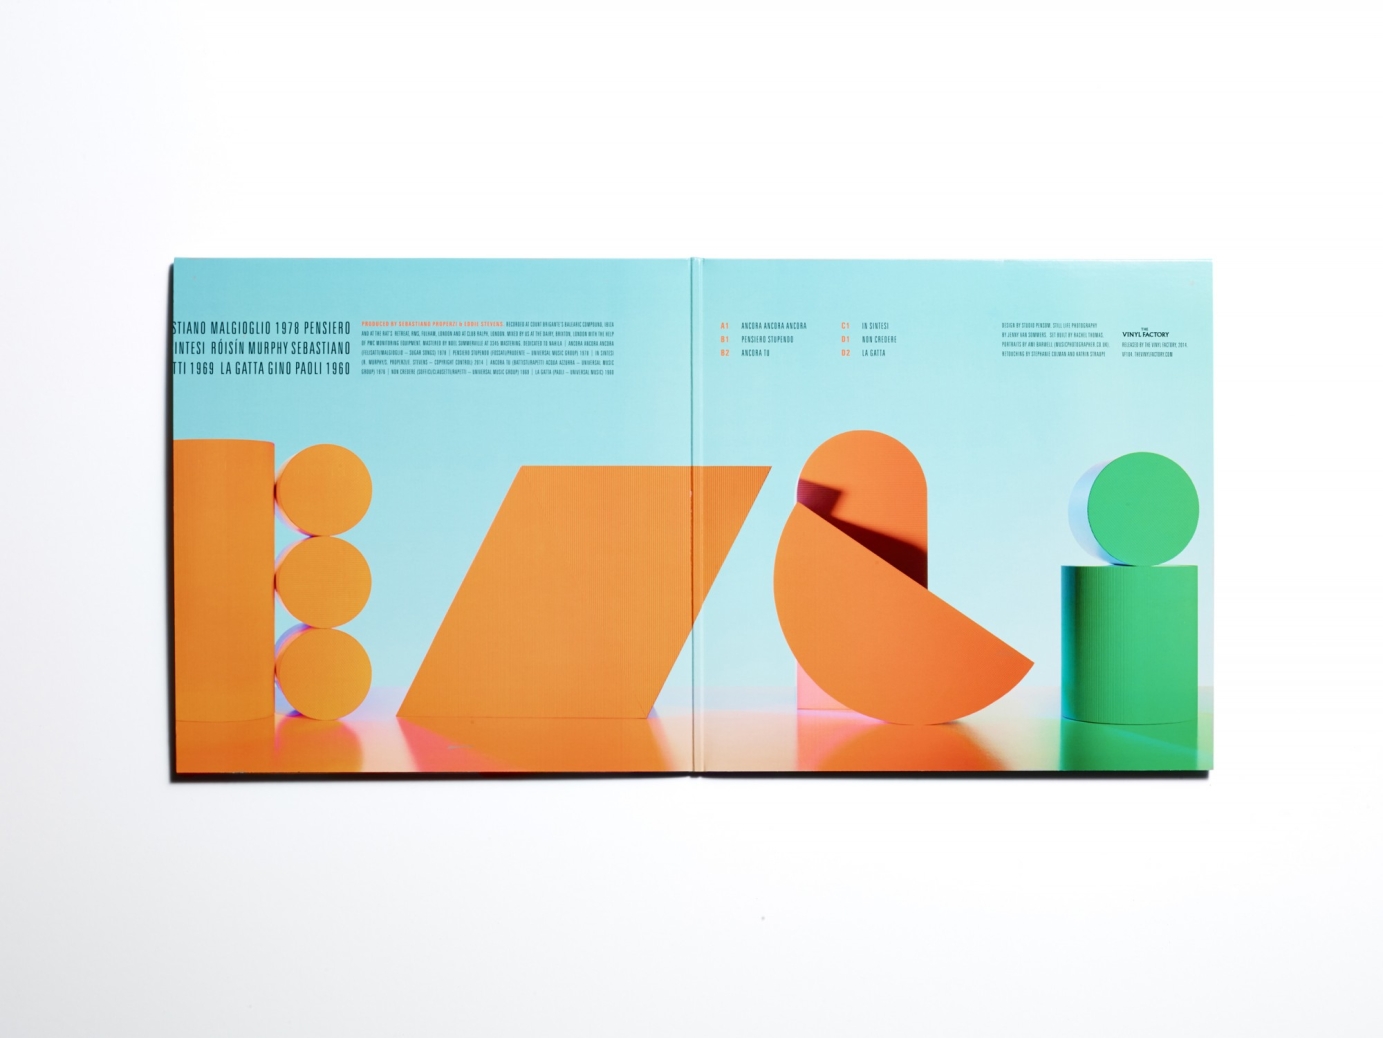 Creative direction and graphic design for Róisín Murphy by StudioPensom